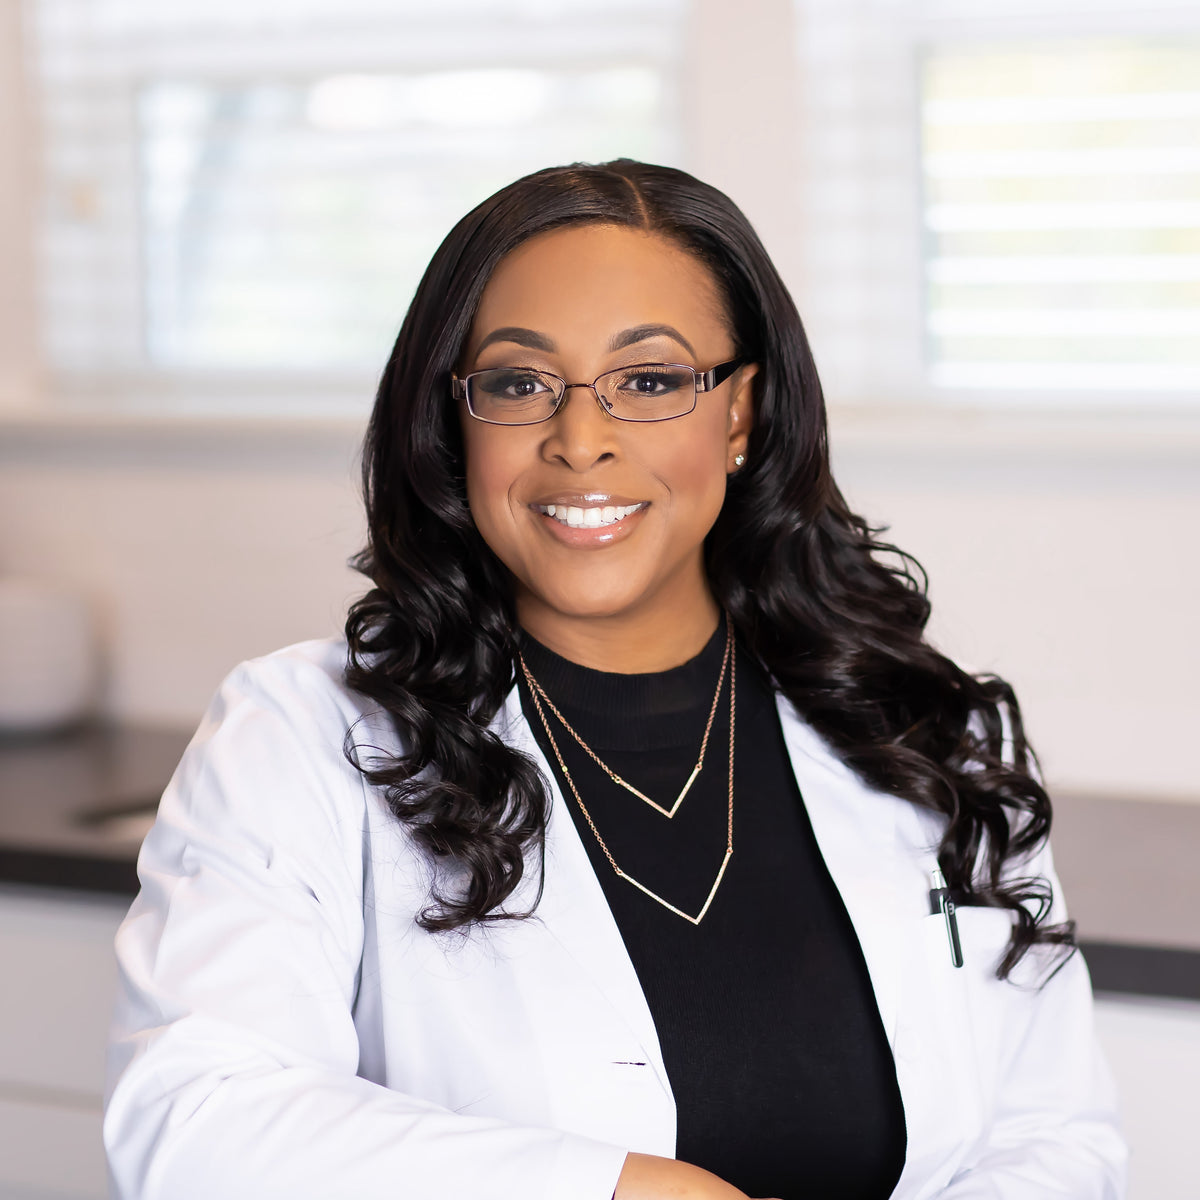 Portrait of a smiling woman with black hair, glasses, white lab coat, in a bright interior.